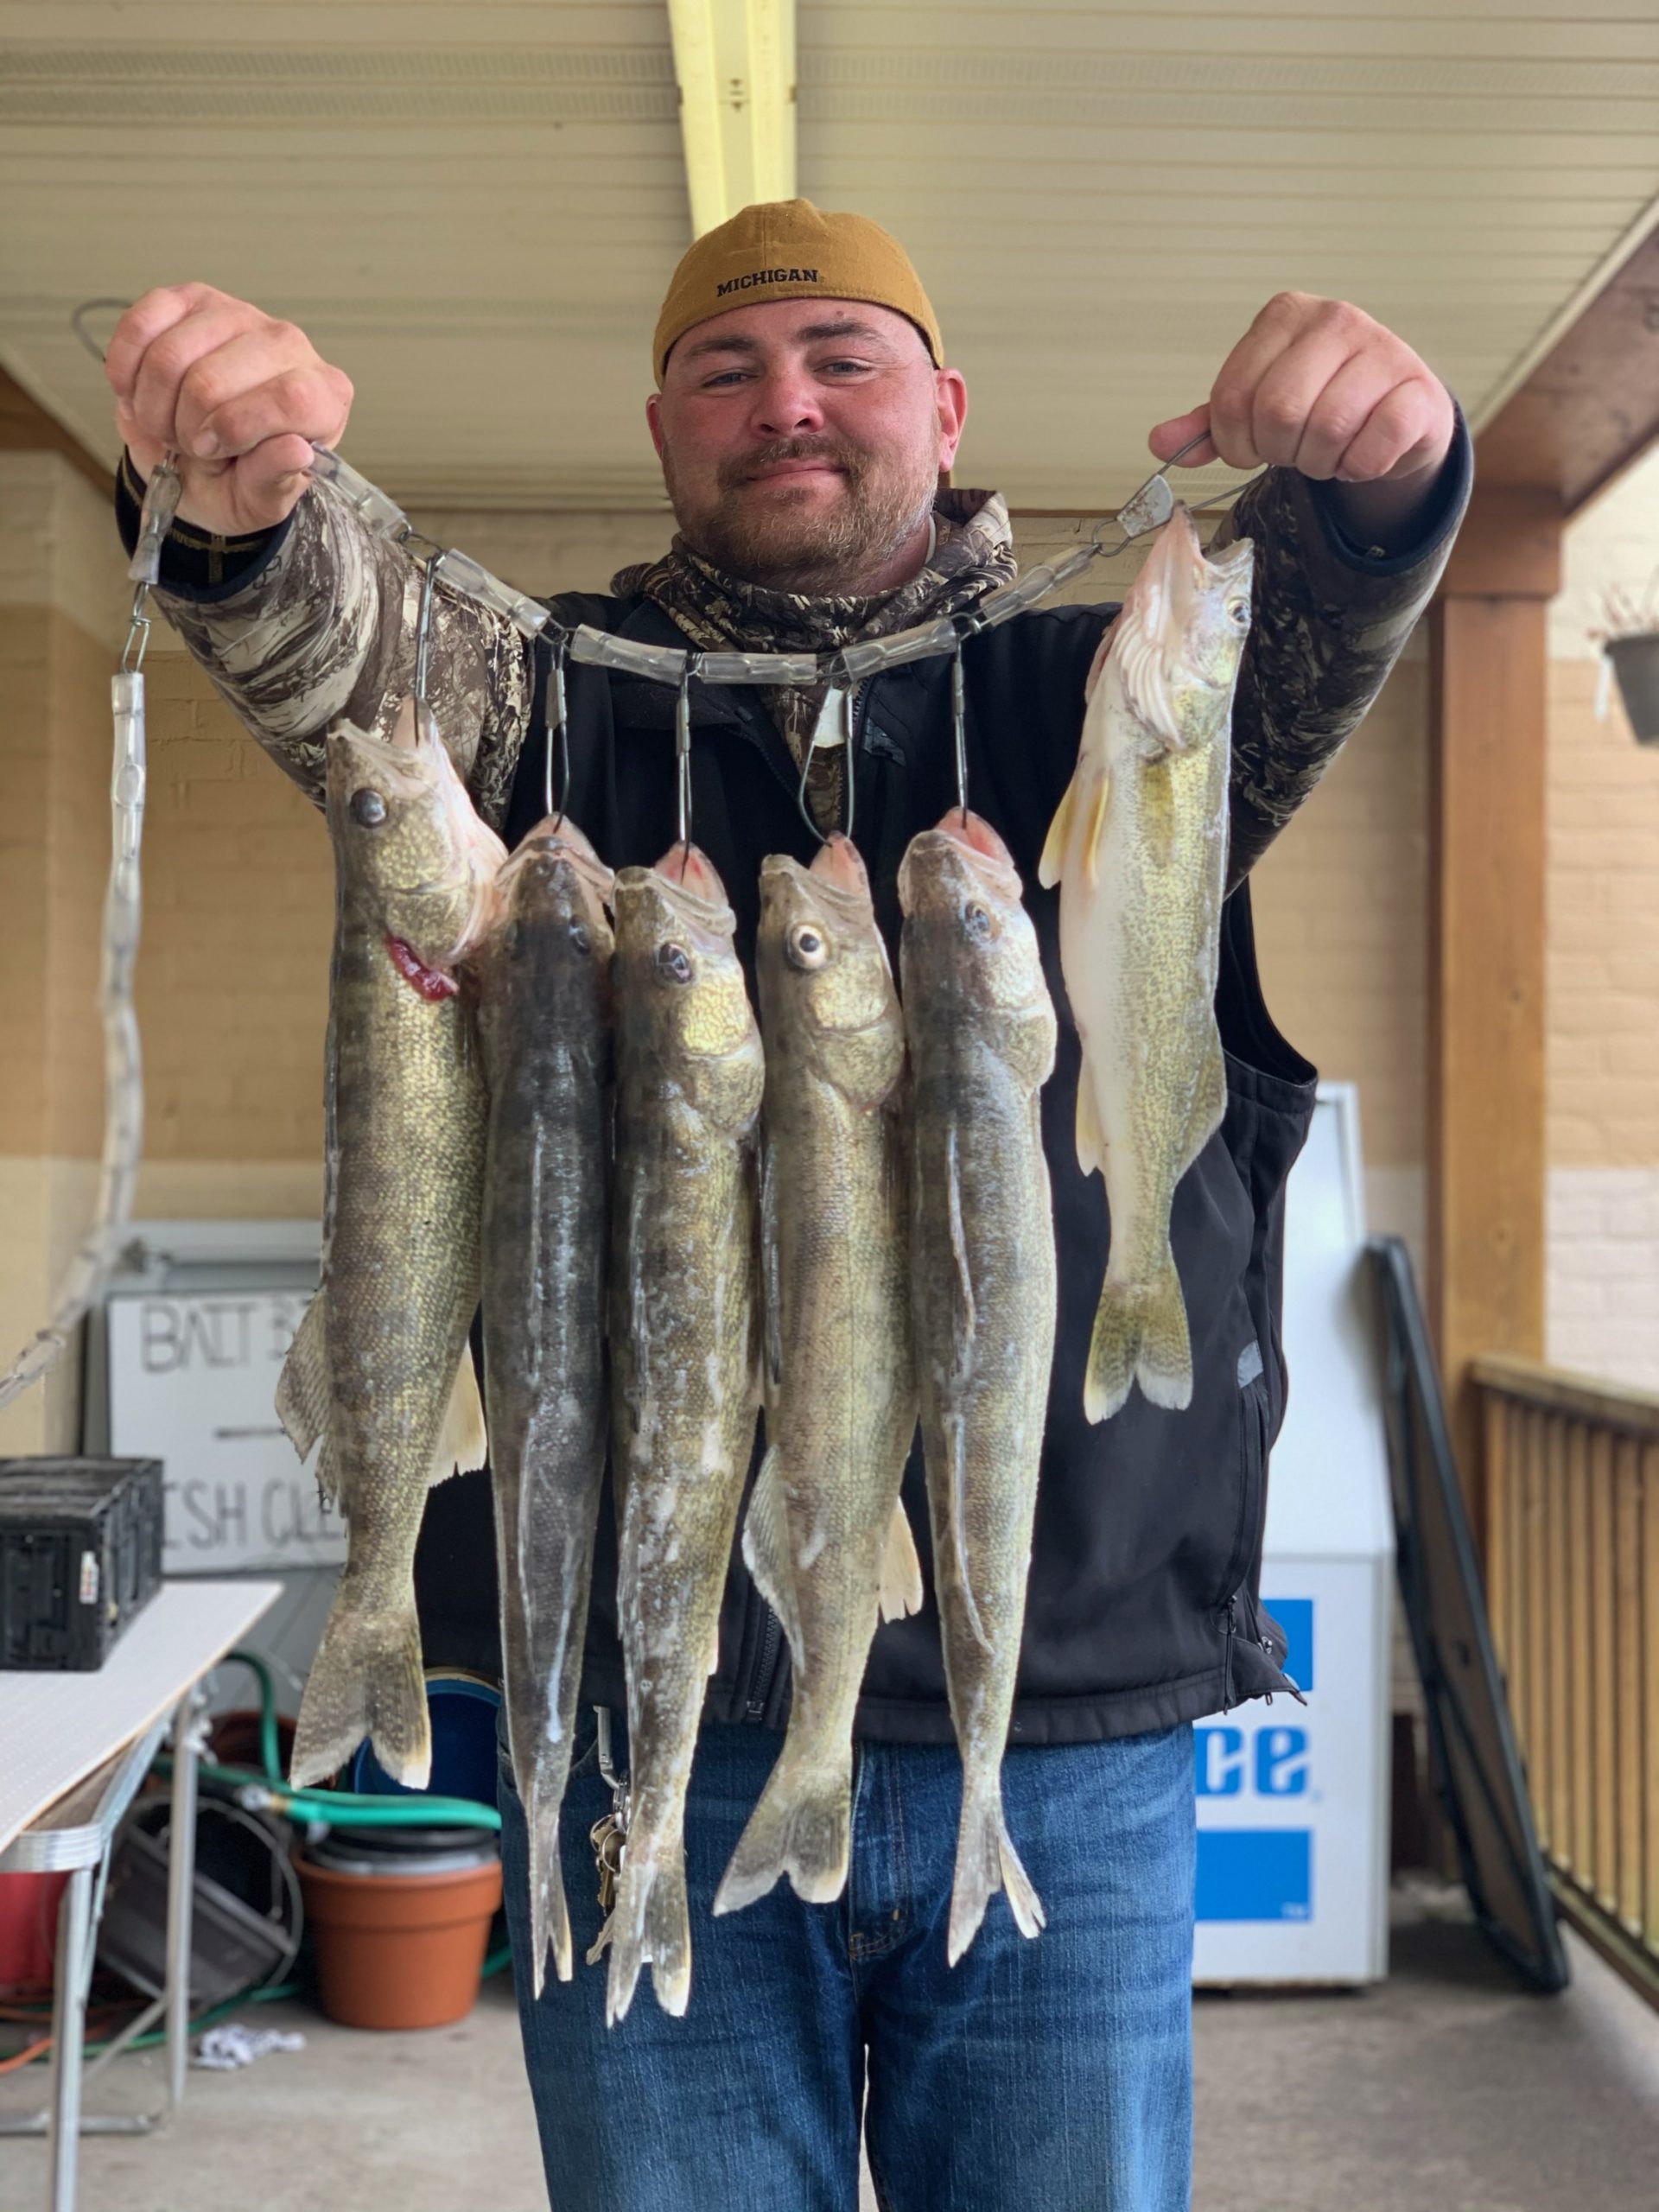 Maumee River report. 16 April 20